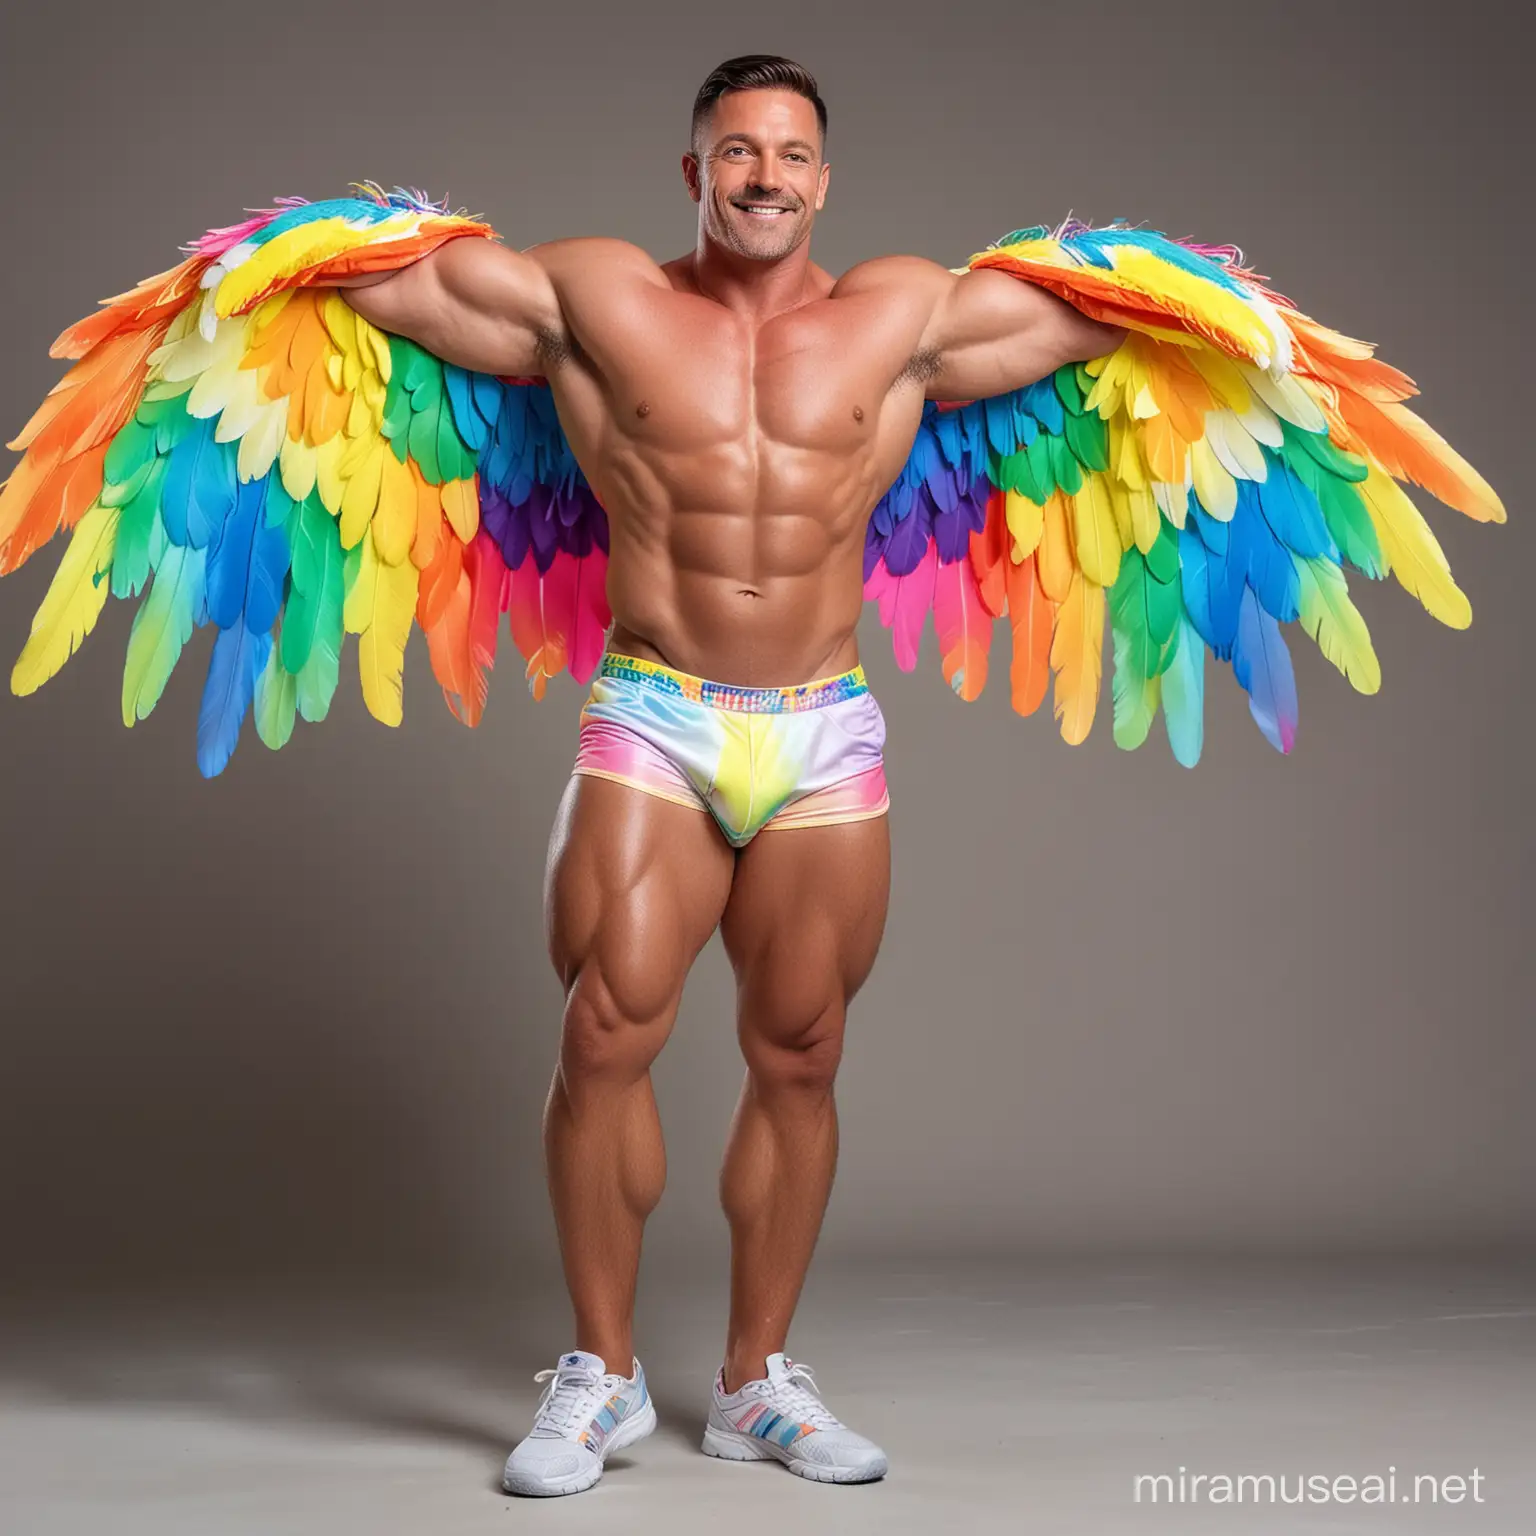 Strong 30s Bodybuilder Flexing in Rainbow Jacket with Eagle Wings